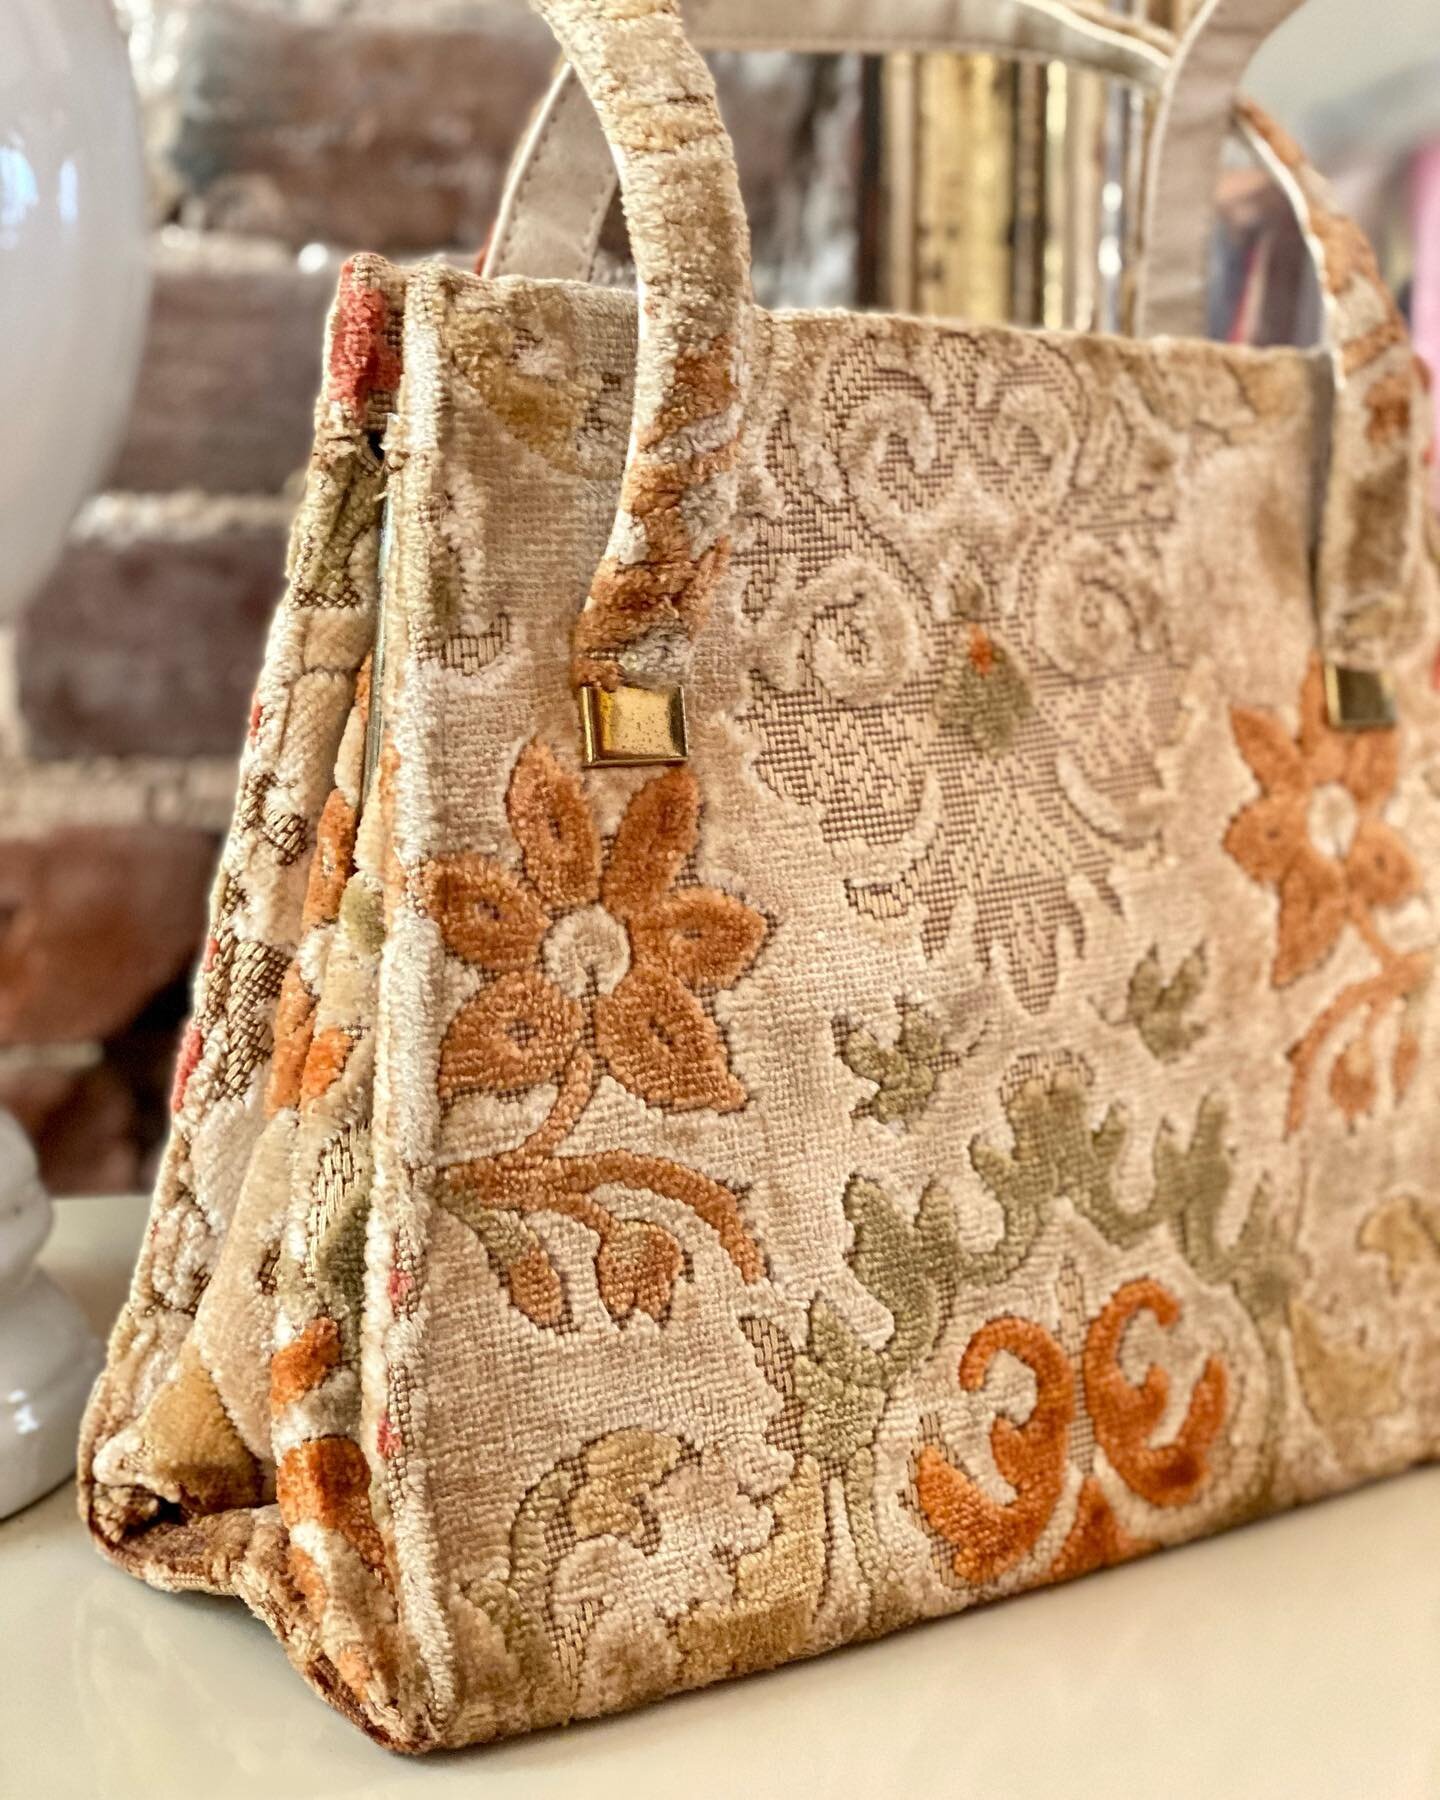 1950&rsquo;s chenille brocade tapestry handbag in the most beautiful hues, she is a BEAUT!
&bull;
$68
SHIPPING $8